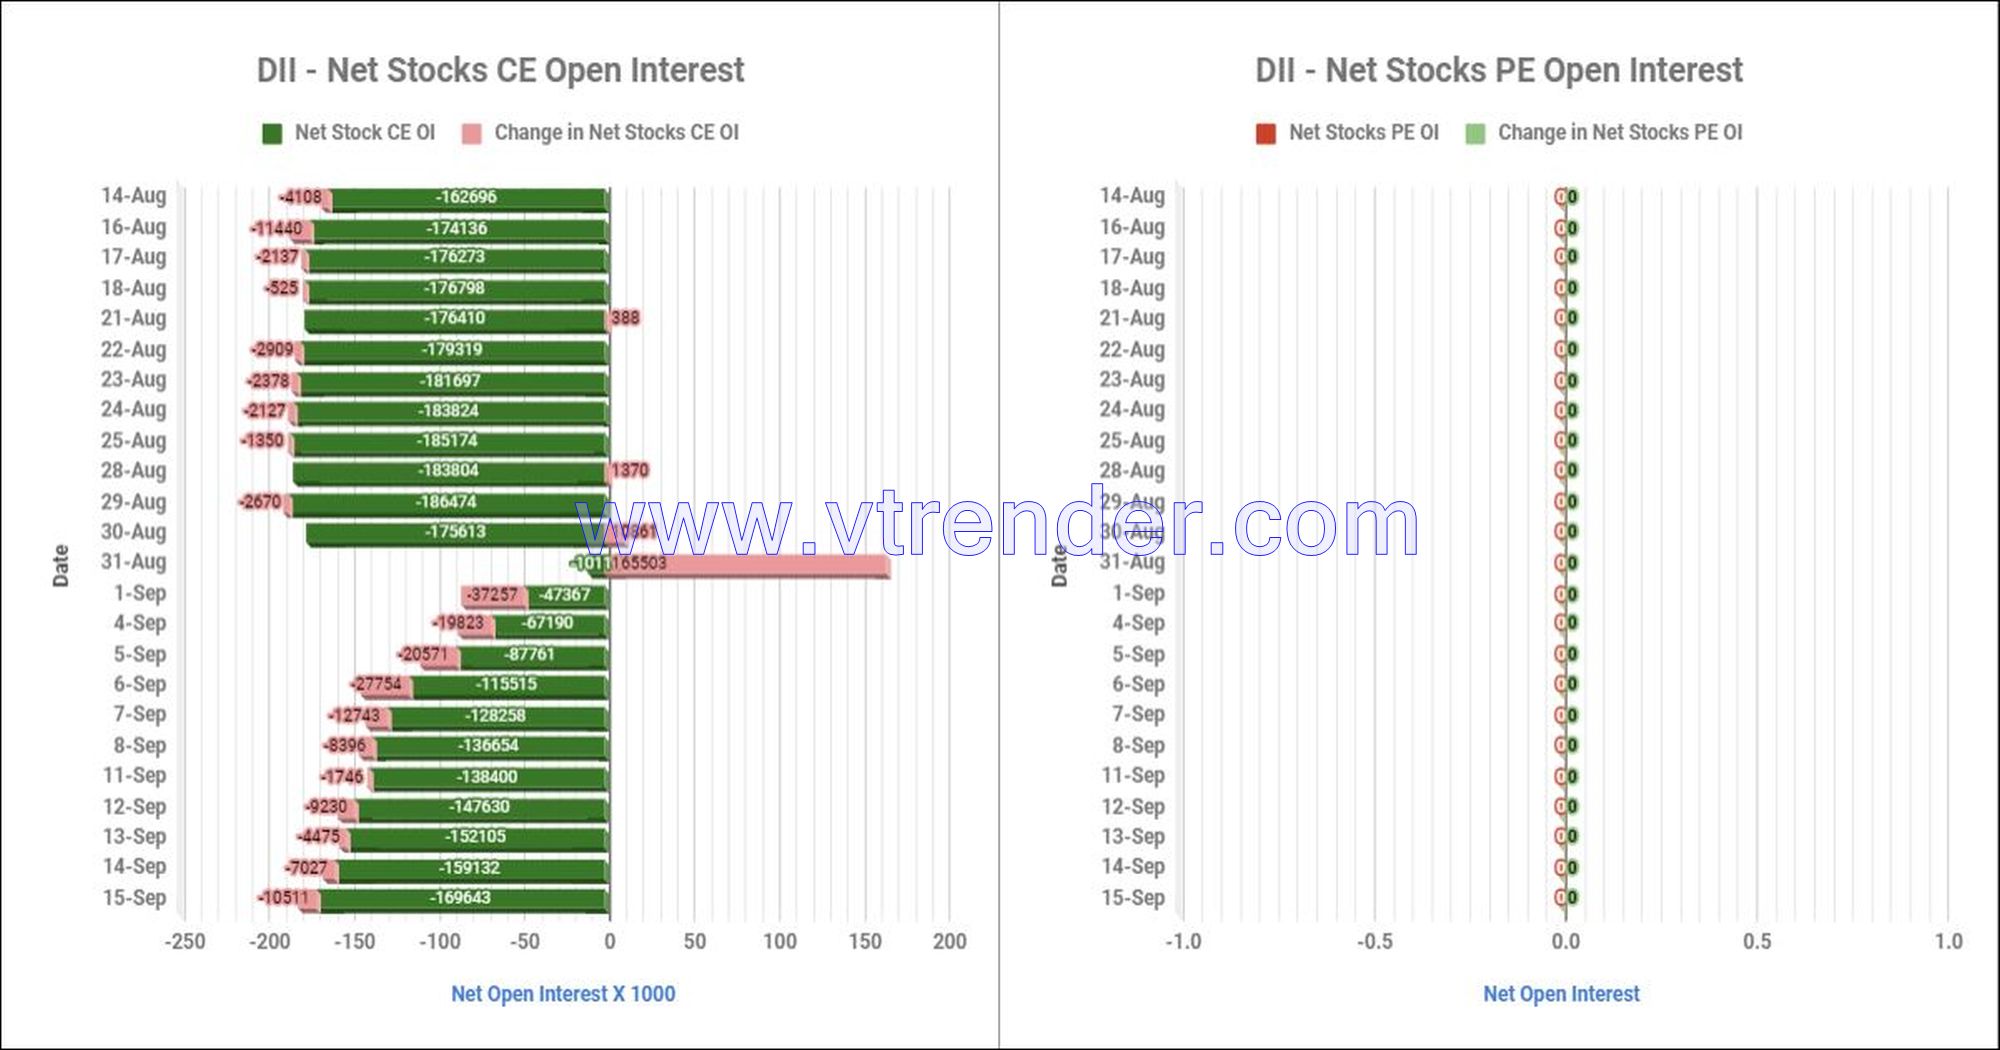 Diistop15Sep Participantwise Net Open Interest And Net Equity Investments – 15Th Sep 2023 Ce, Client, Dii, Fii, Index Futures, Index Options, Open Interest, Pe, Prop, Stocks Futures